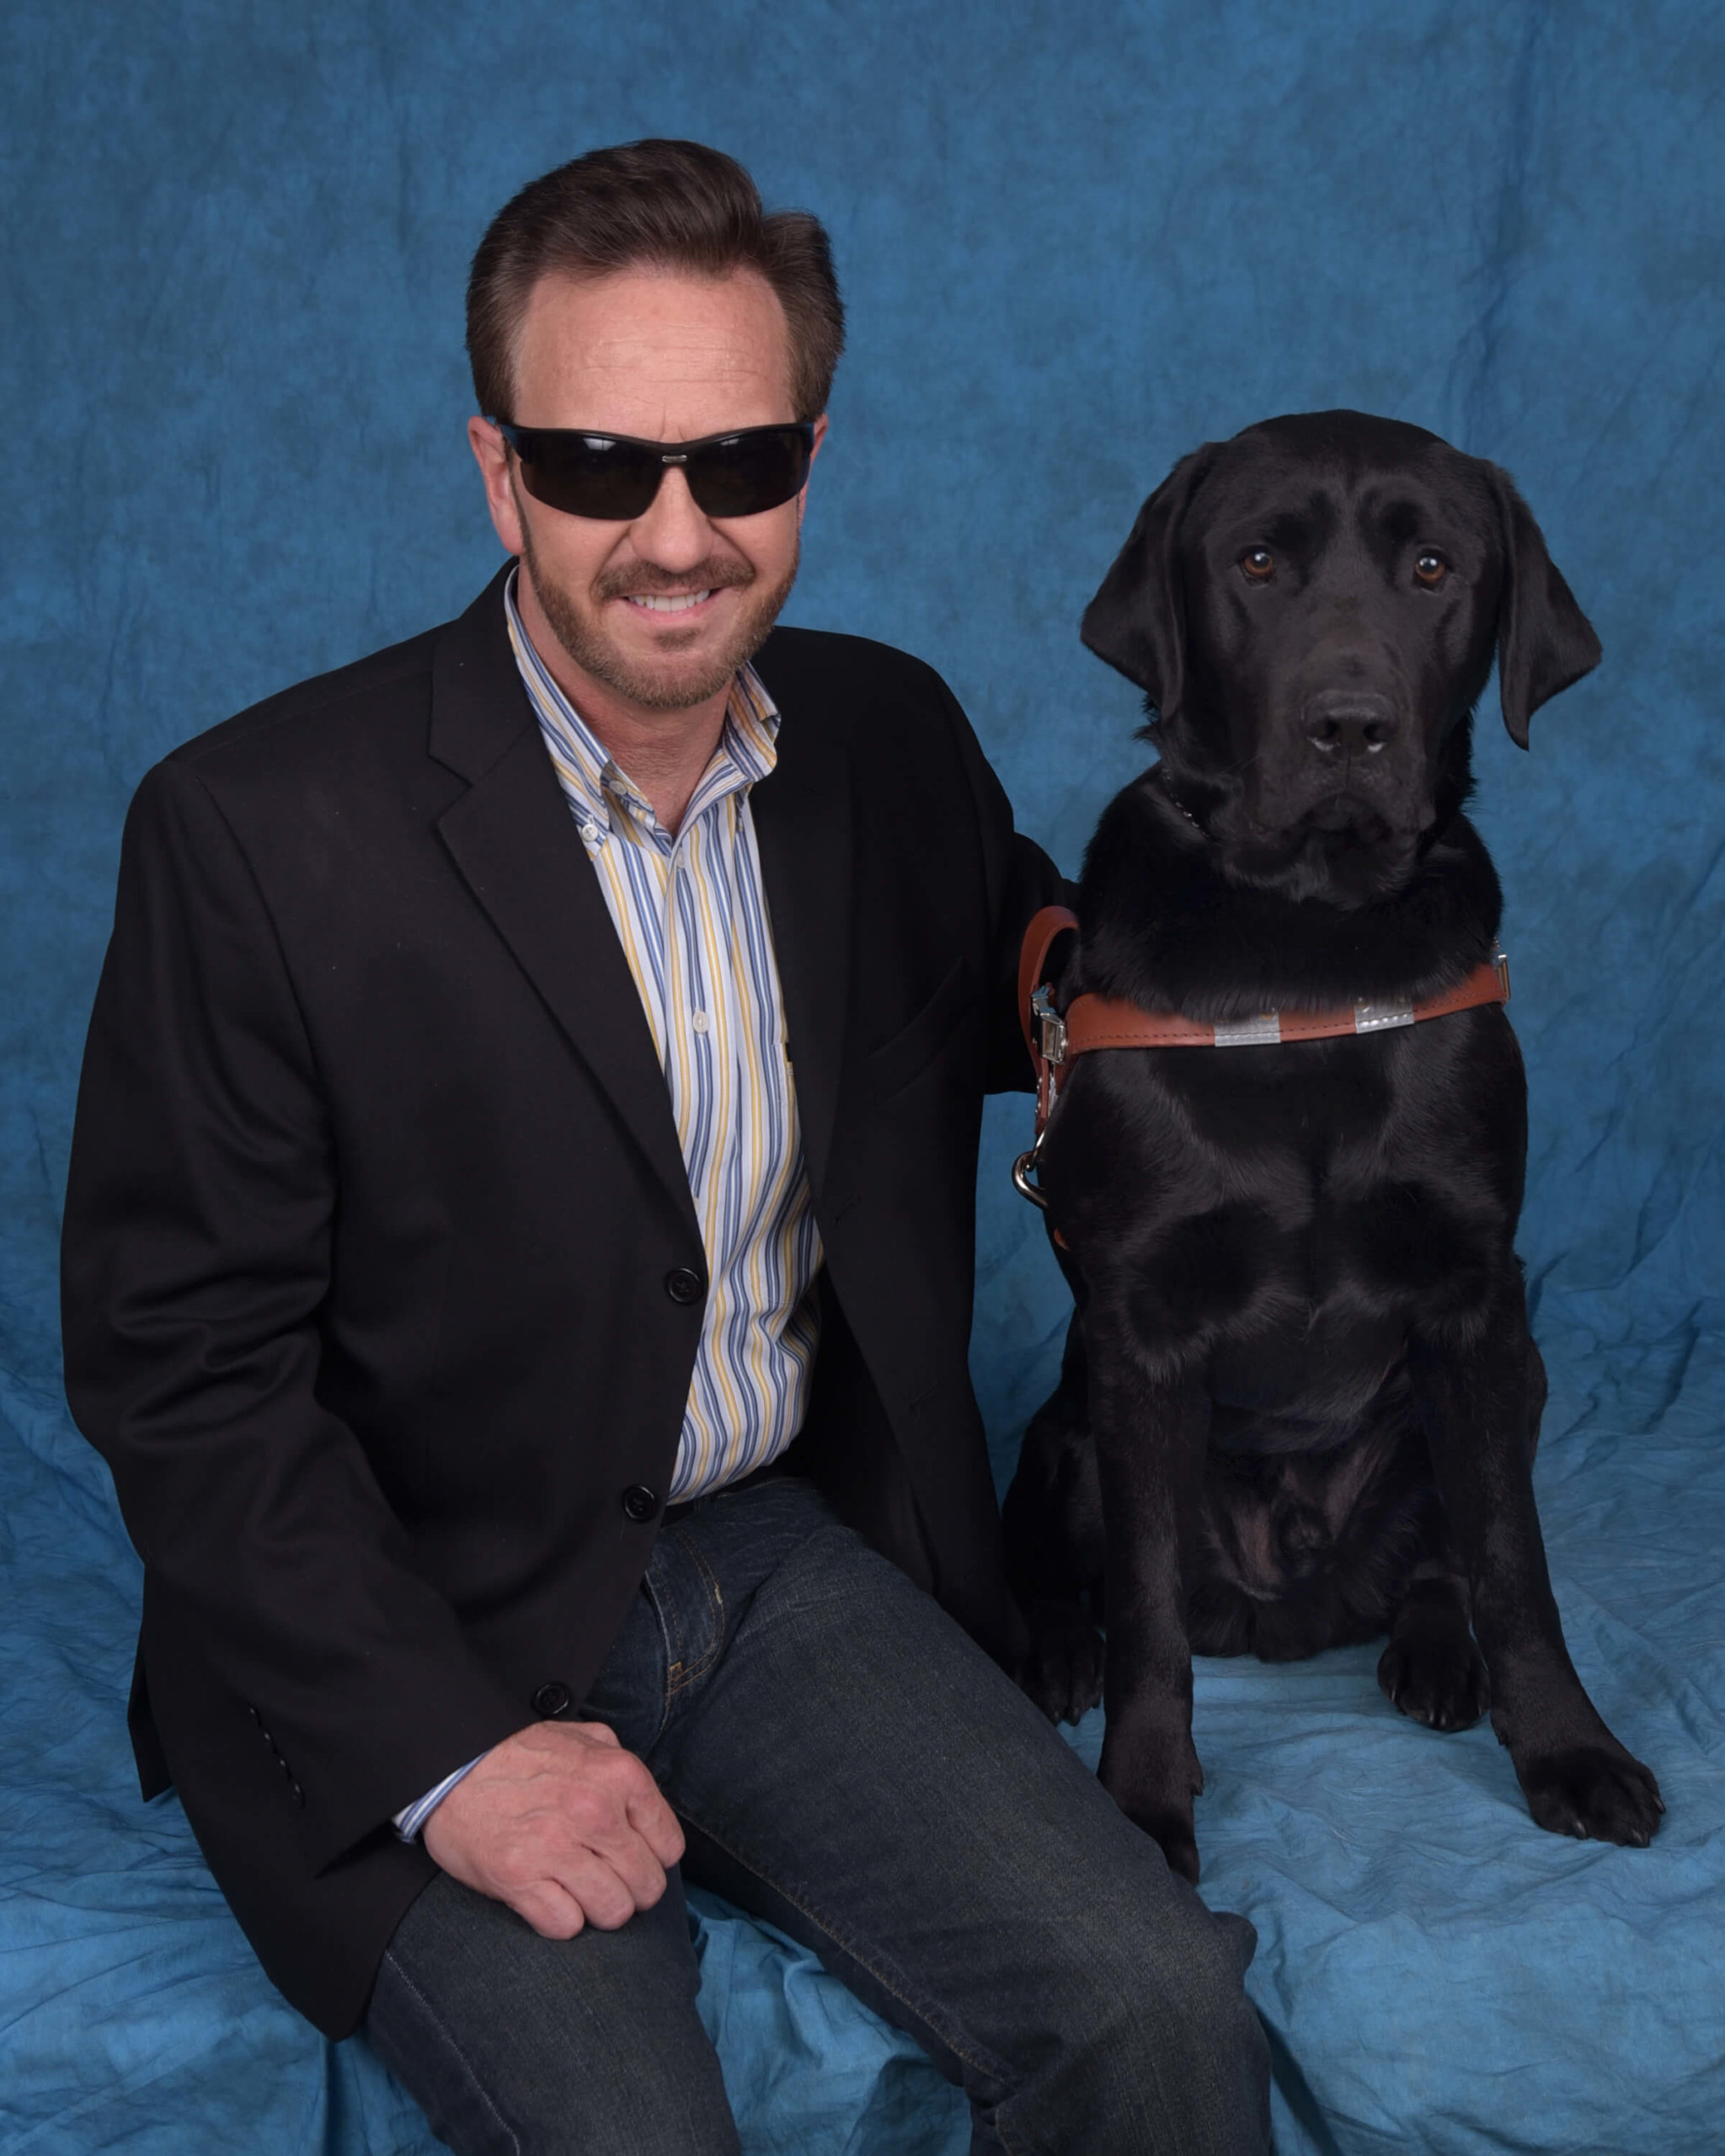 Scott and guide dog Zed